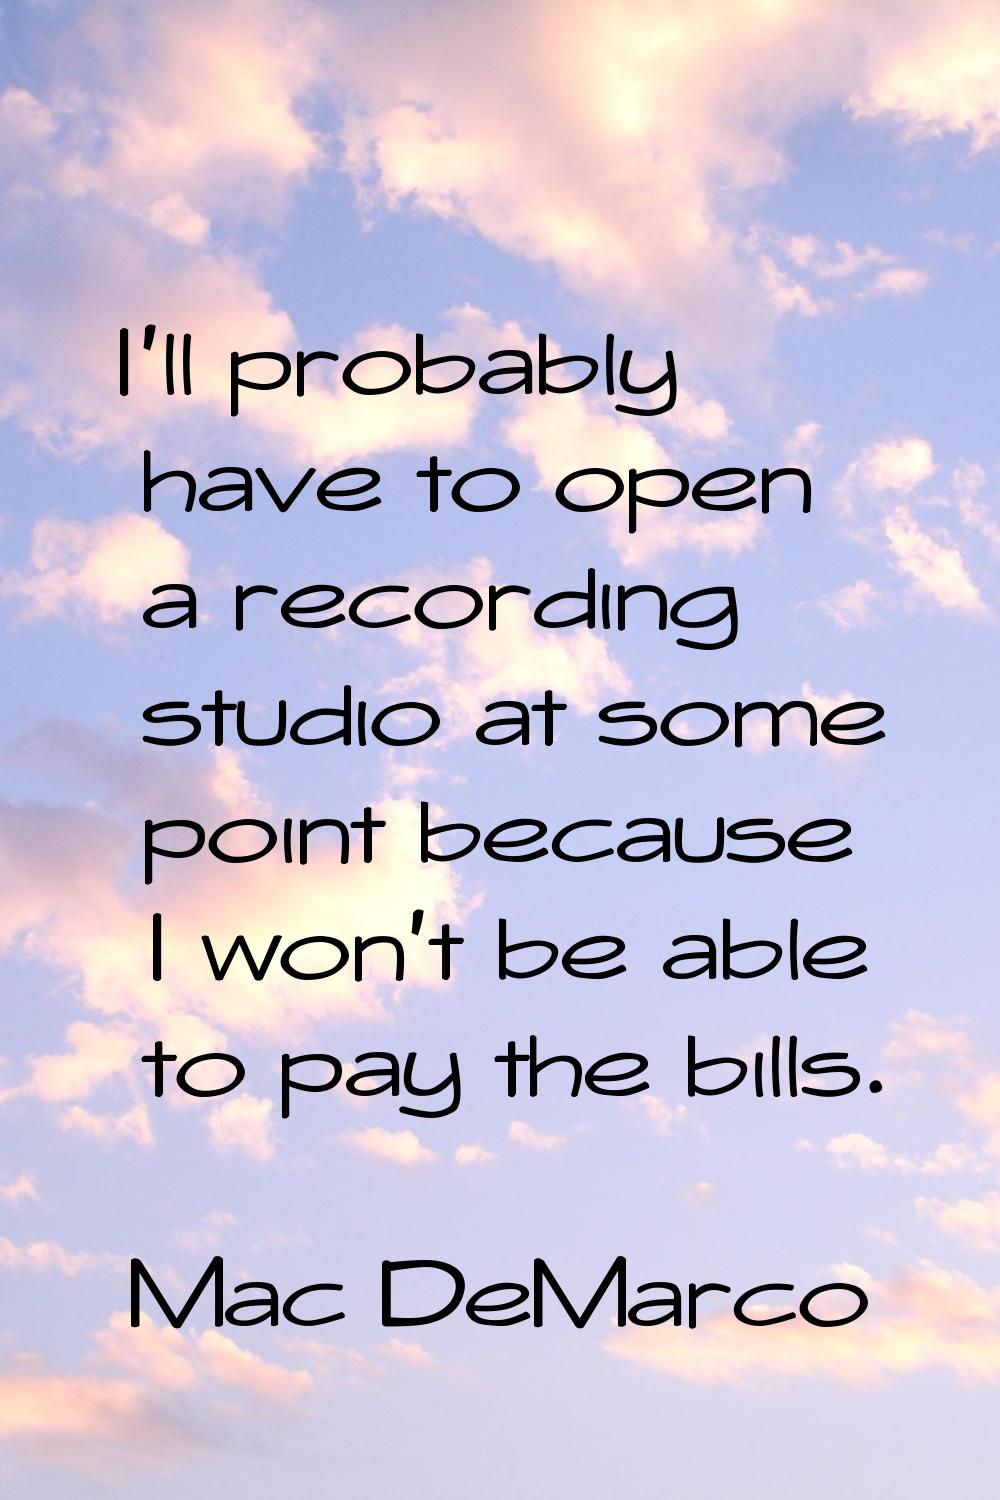 I'll probably have to open a recording studio at some point because I won't be able to pay the bill